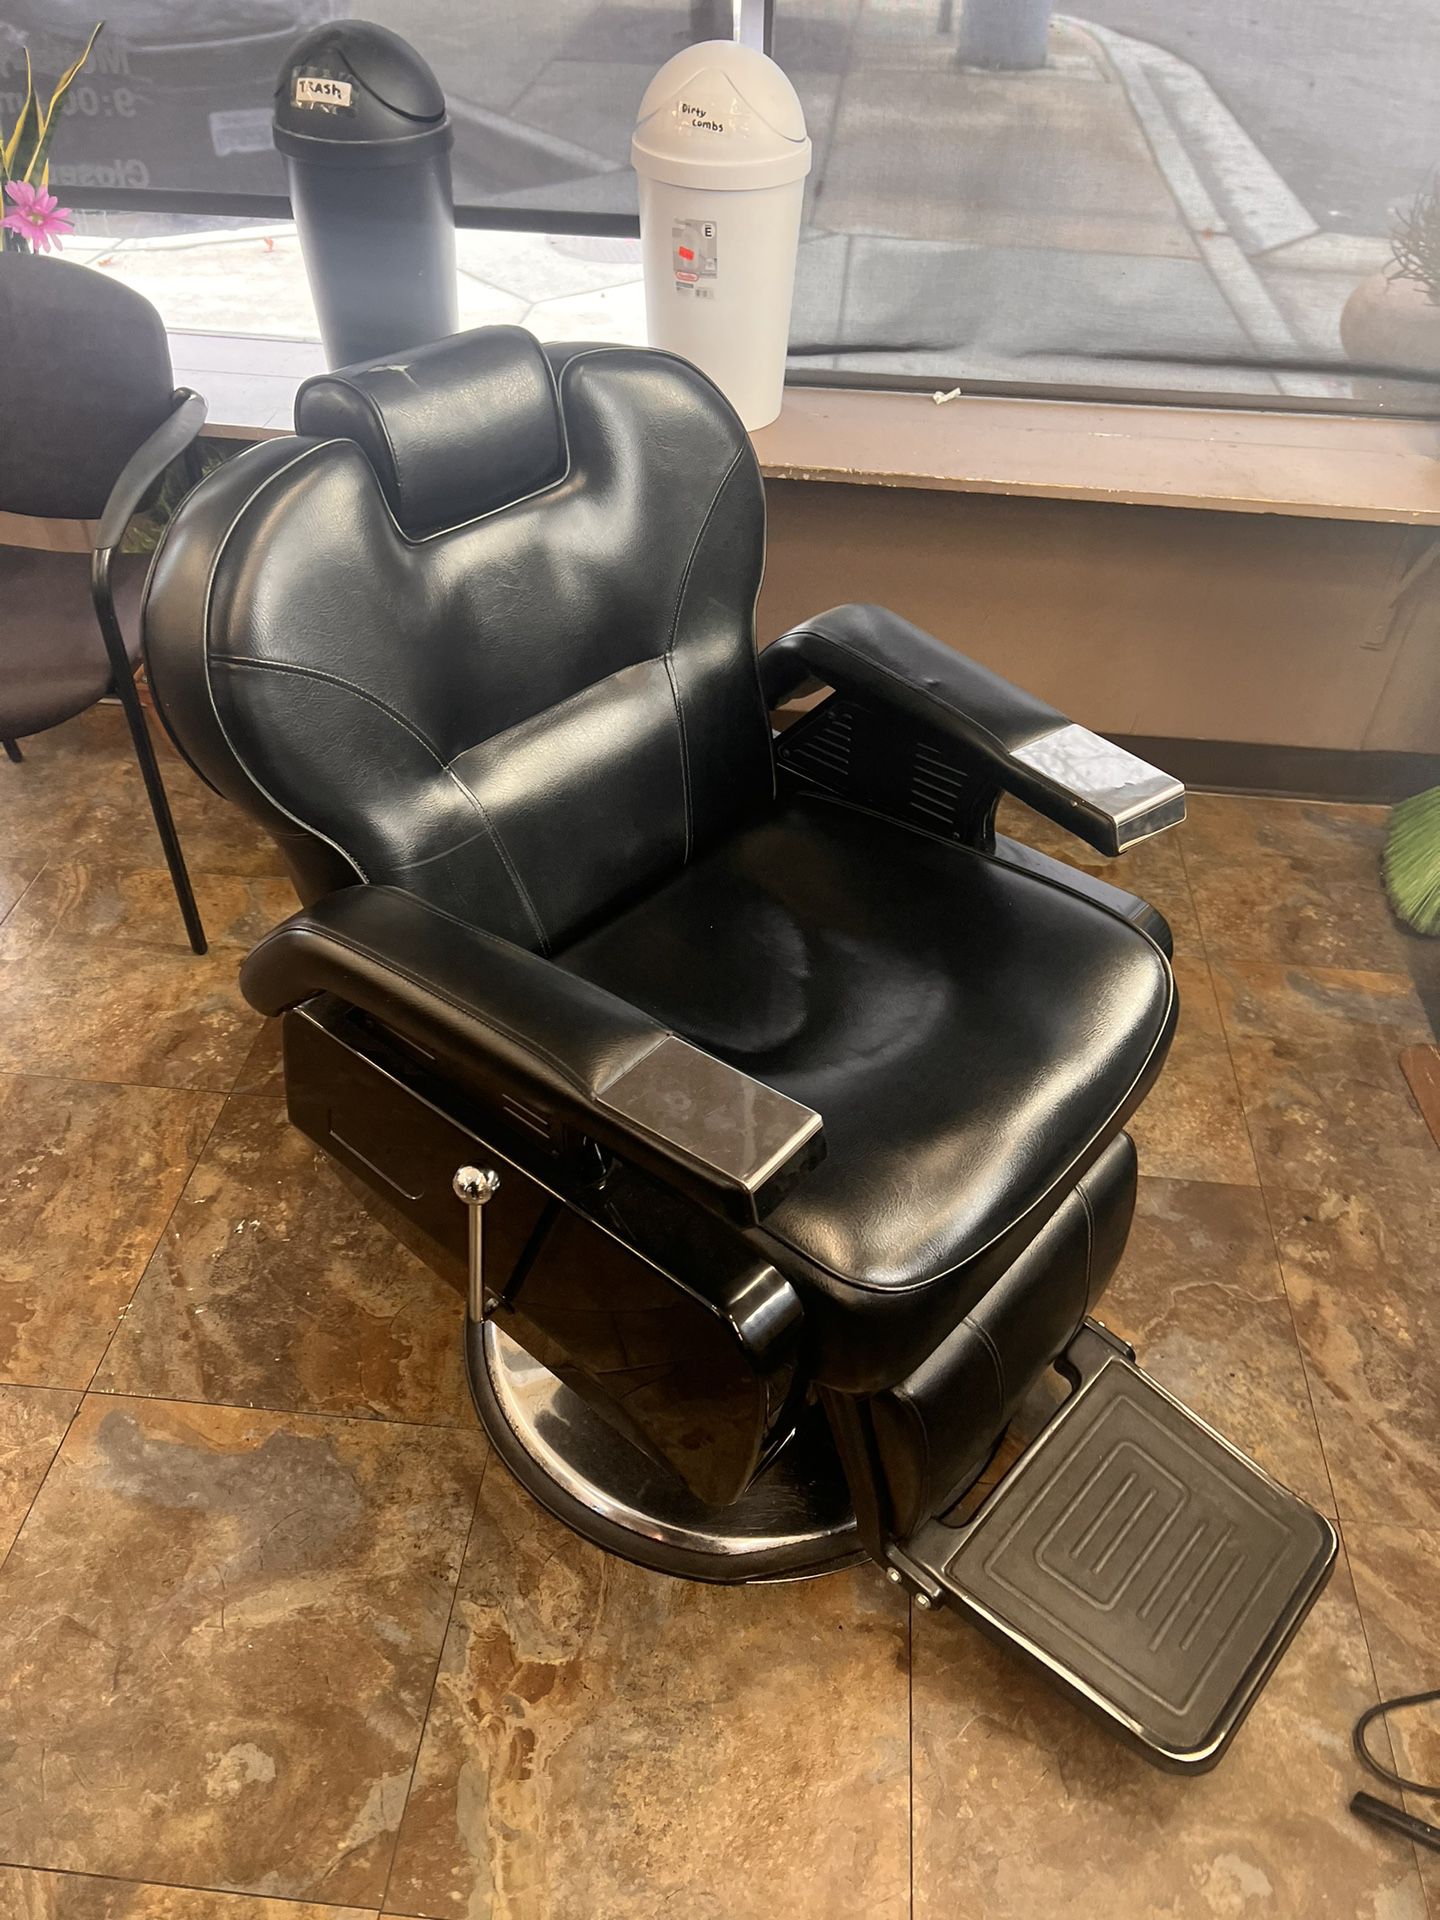 Used Barber Chair